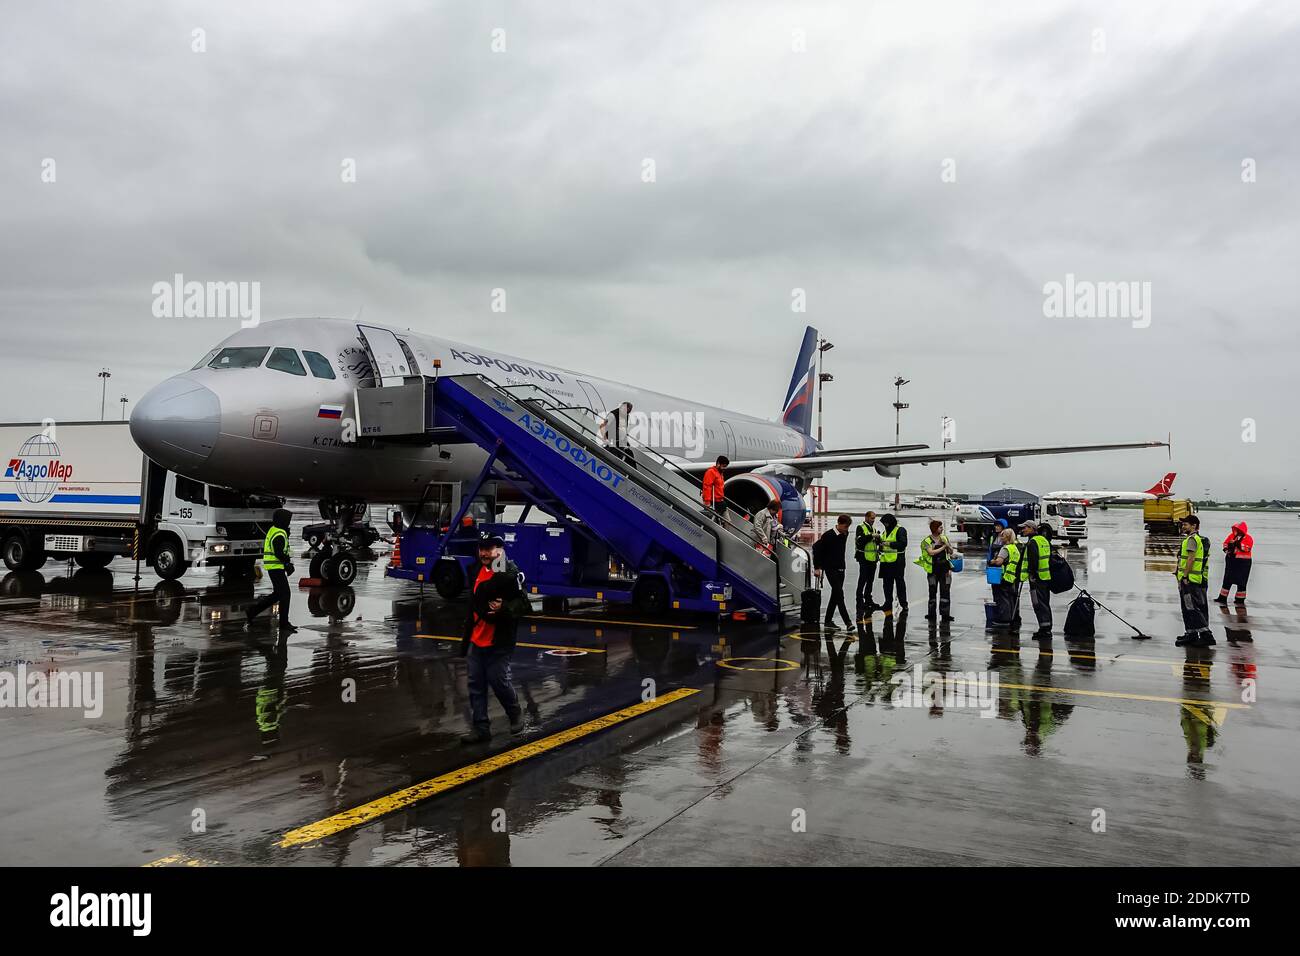 Aeroflot Russian Airlines Airbus A320 airplane Stock Photo